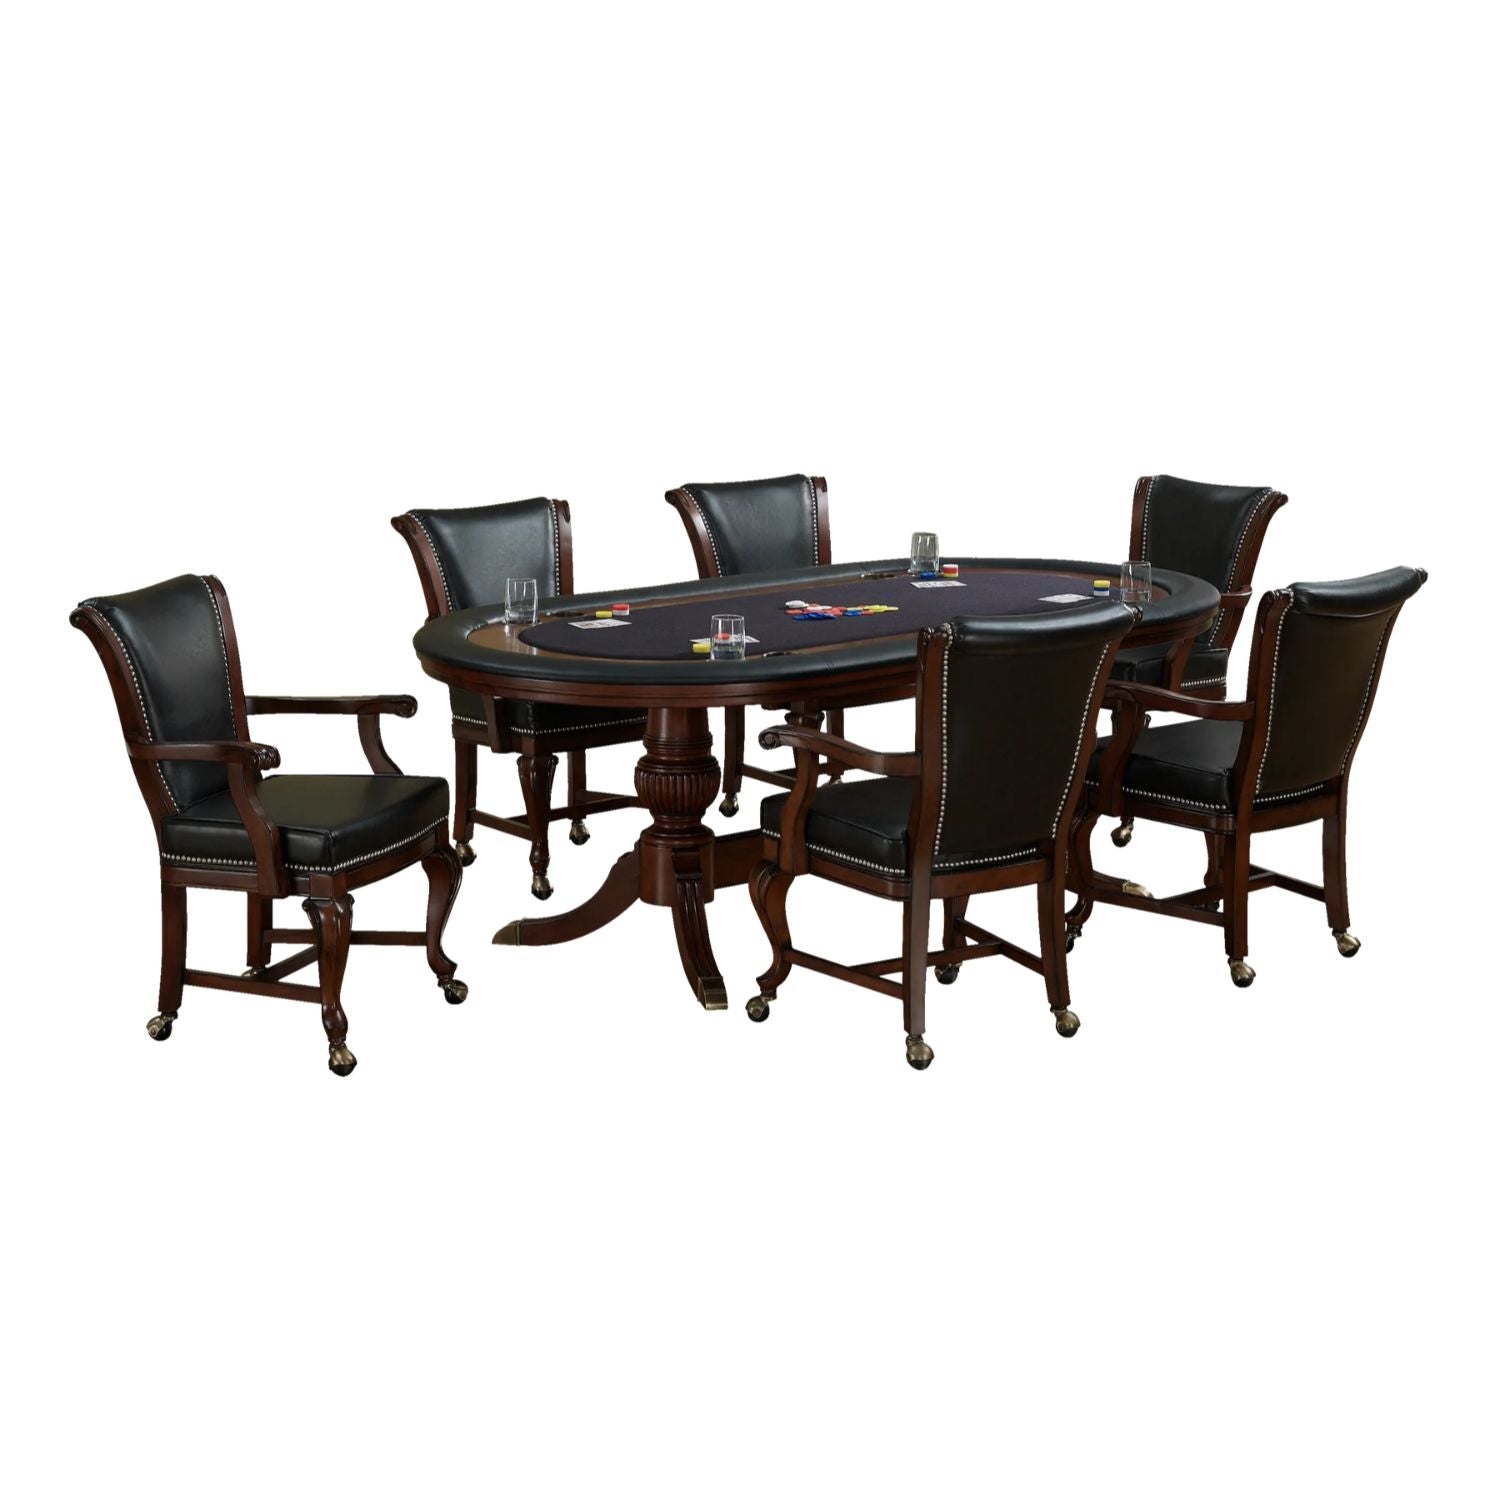 American Heritage Royale Poker and Game Table Set - Gaming Blaze